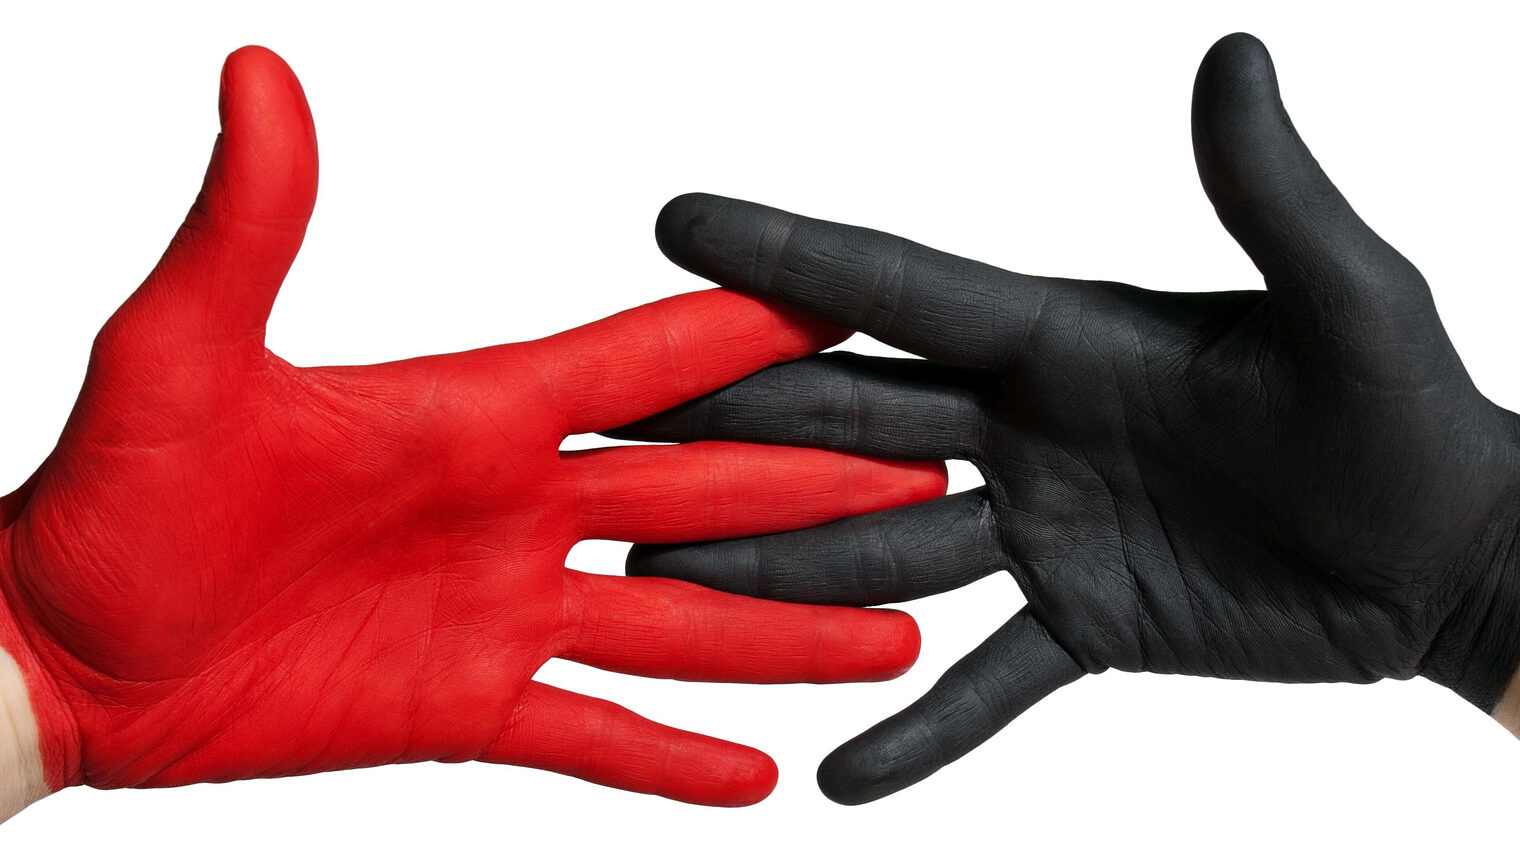 a handshake between a red and a black painted hand, isolated Schlagwort(e): shake hands, handshake, red, black, hands, politics, coalition,, shake hands, handshake, red, black, hands, politics, coalition, government, power, hand, elections, election, retention, union, unite, color, colors, paint, painted, different, difference, migration, acceptance, tolerance, environment, party, political, vote, teamwork, together, community, strong, strength, helping alliance, assistance, support, manage, direct, conduct, voter, voters agree, parties, germany, german, rule, partnership, friendship, colorful, ruling, gover